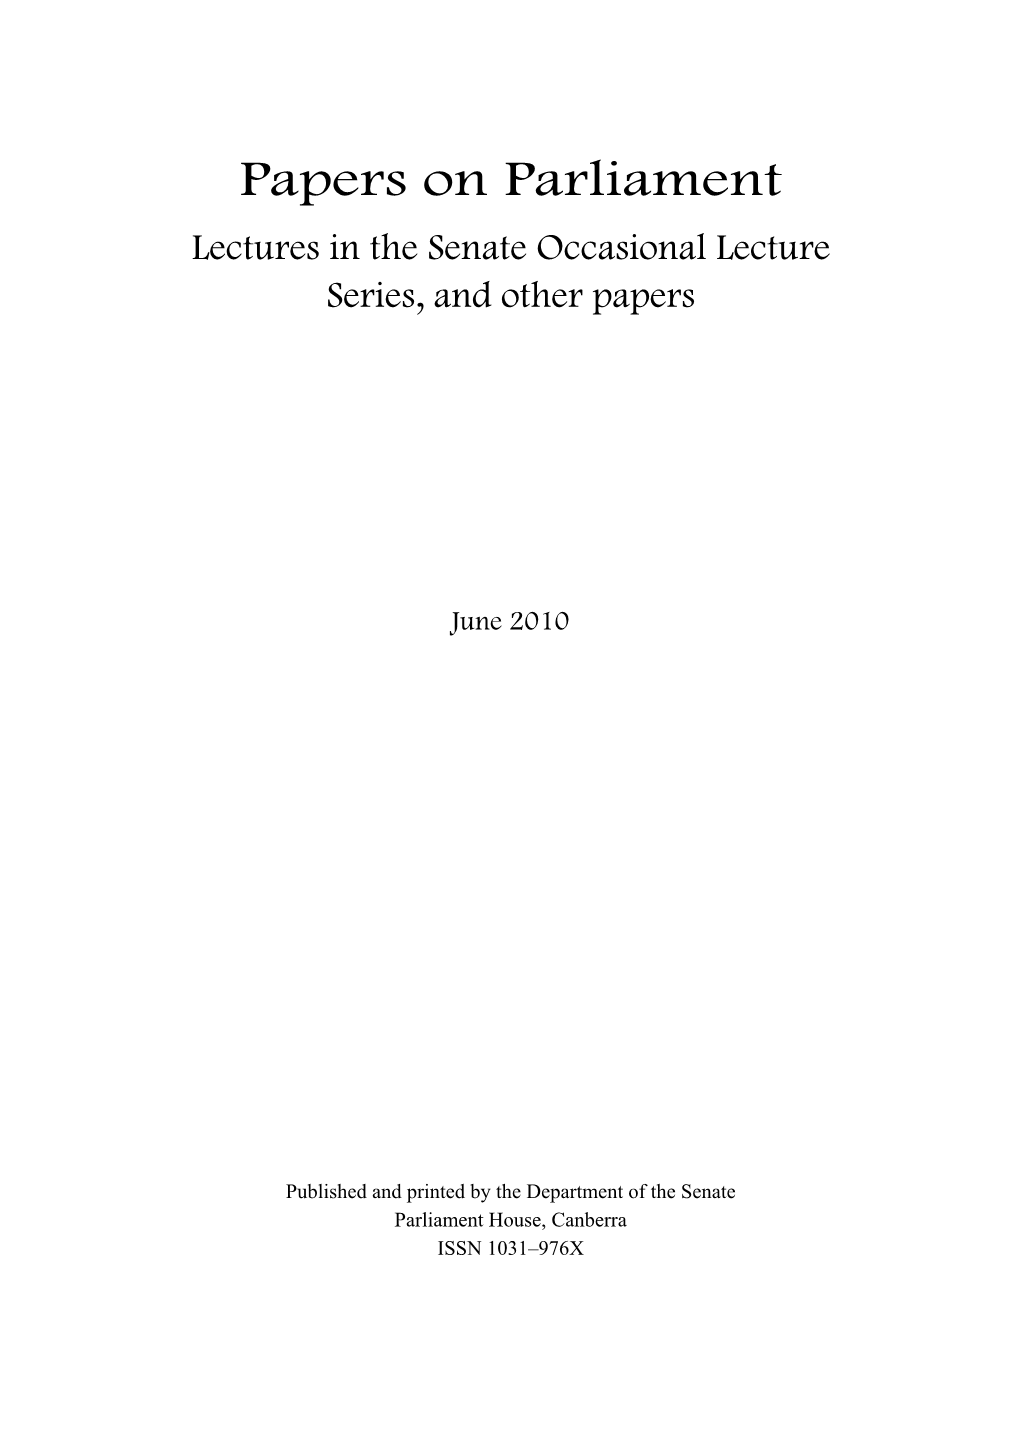 Lectures in the Senate Occasional Lecture Series, and Other Papers